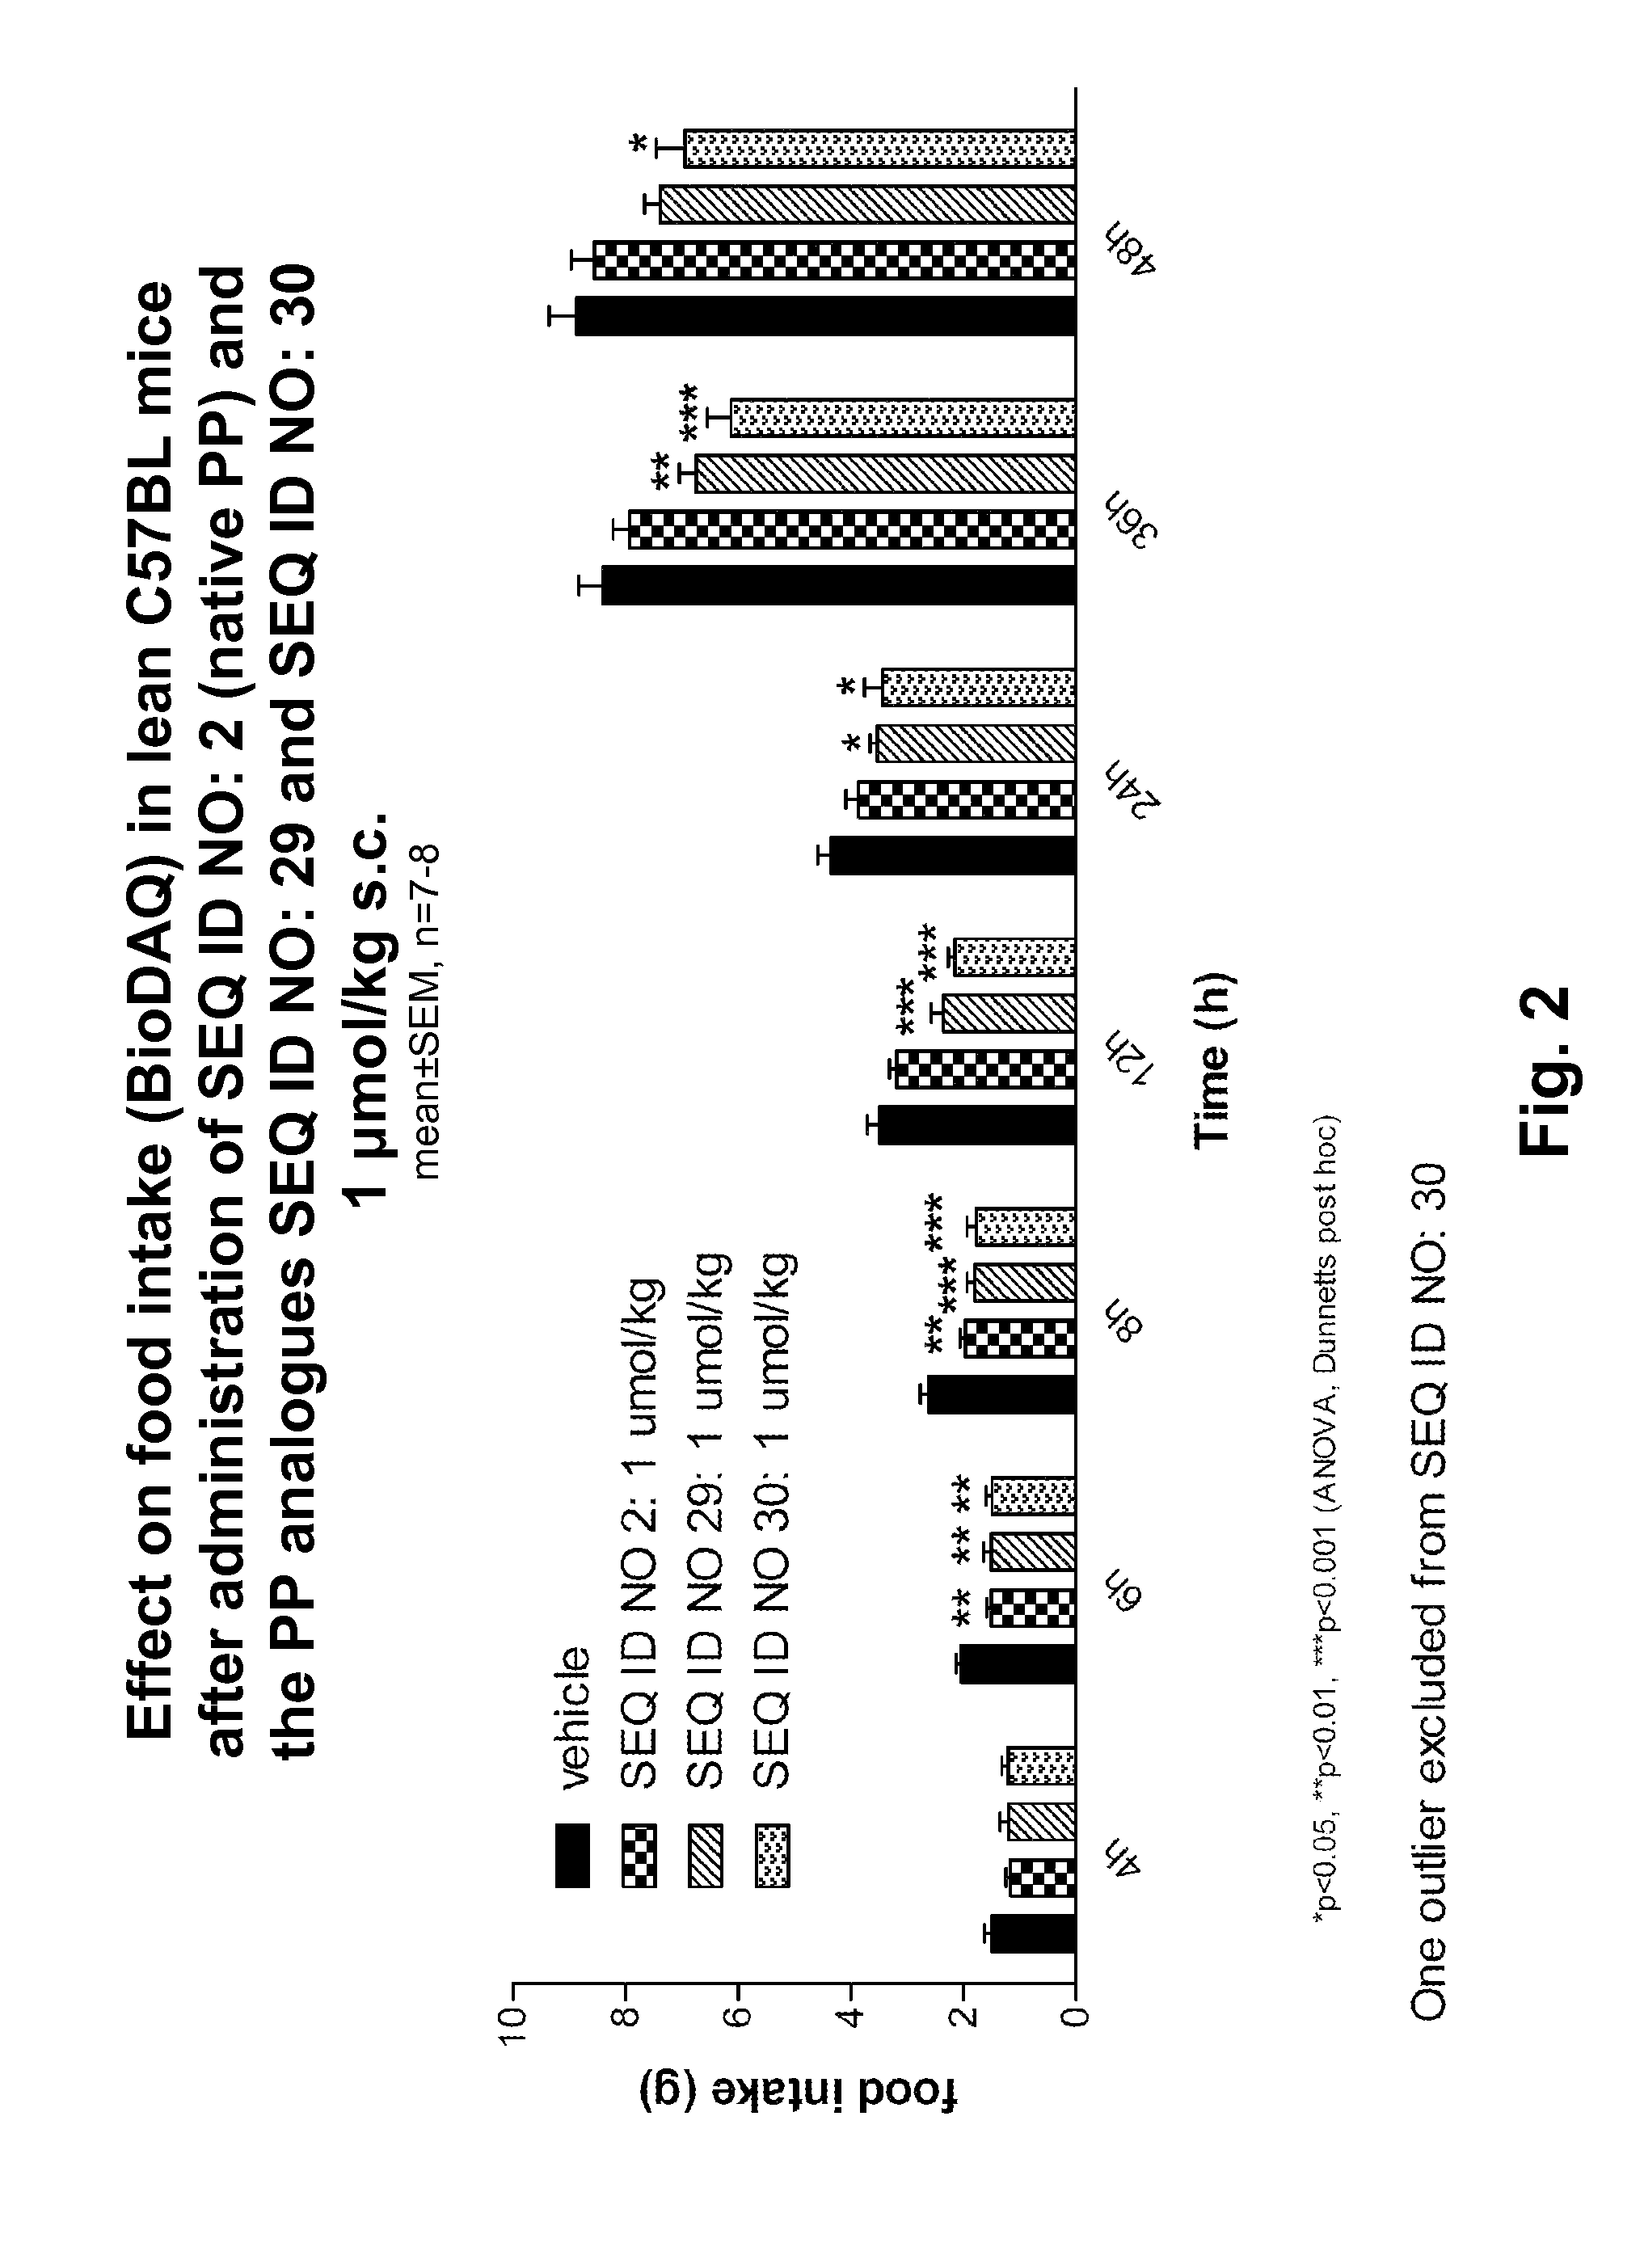 Long-Acting Y2 and/or Y4 Receptor Agonists